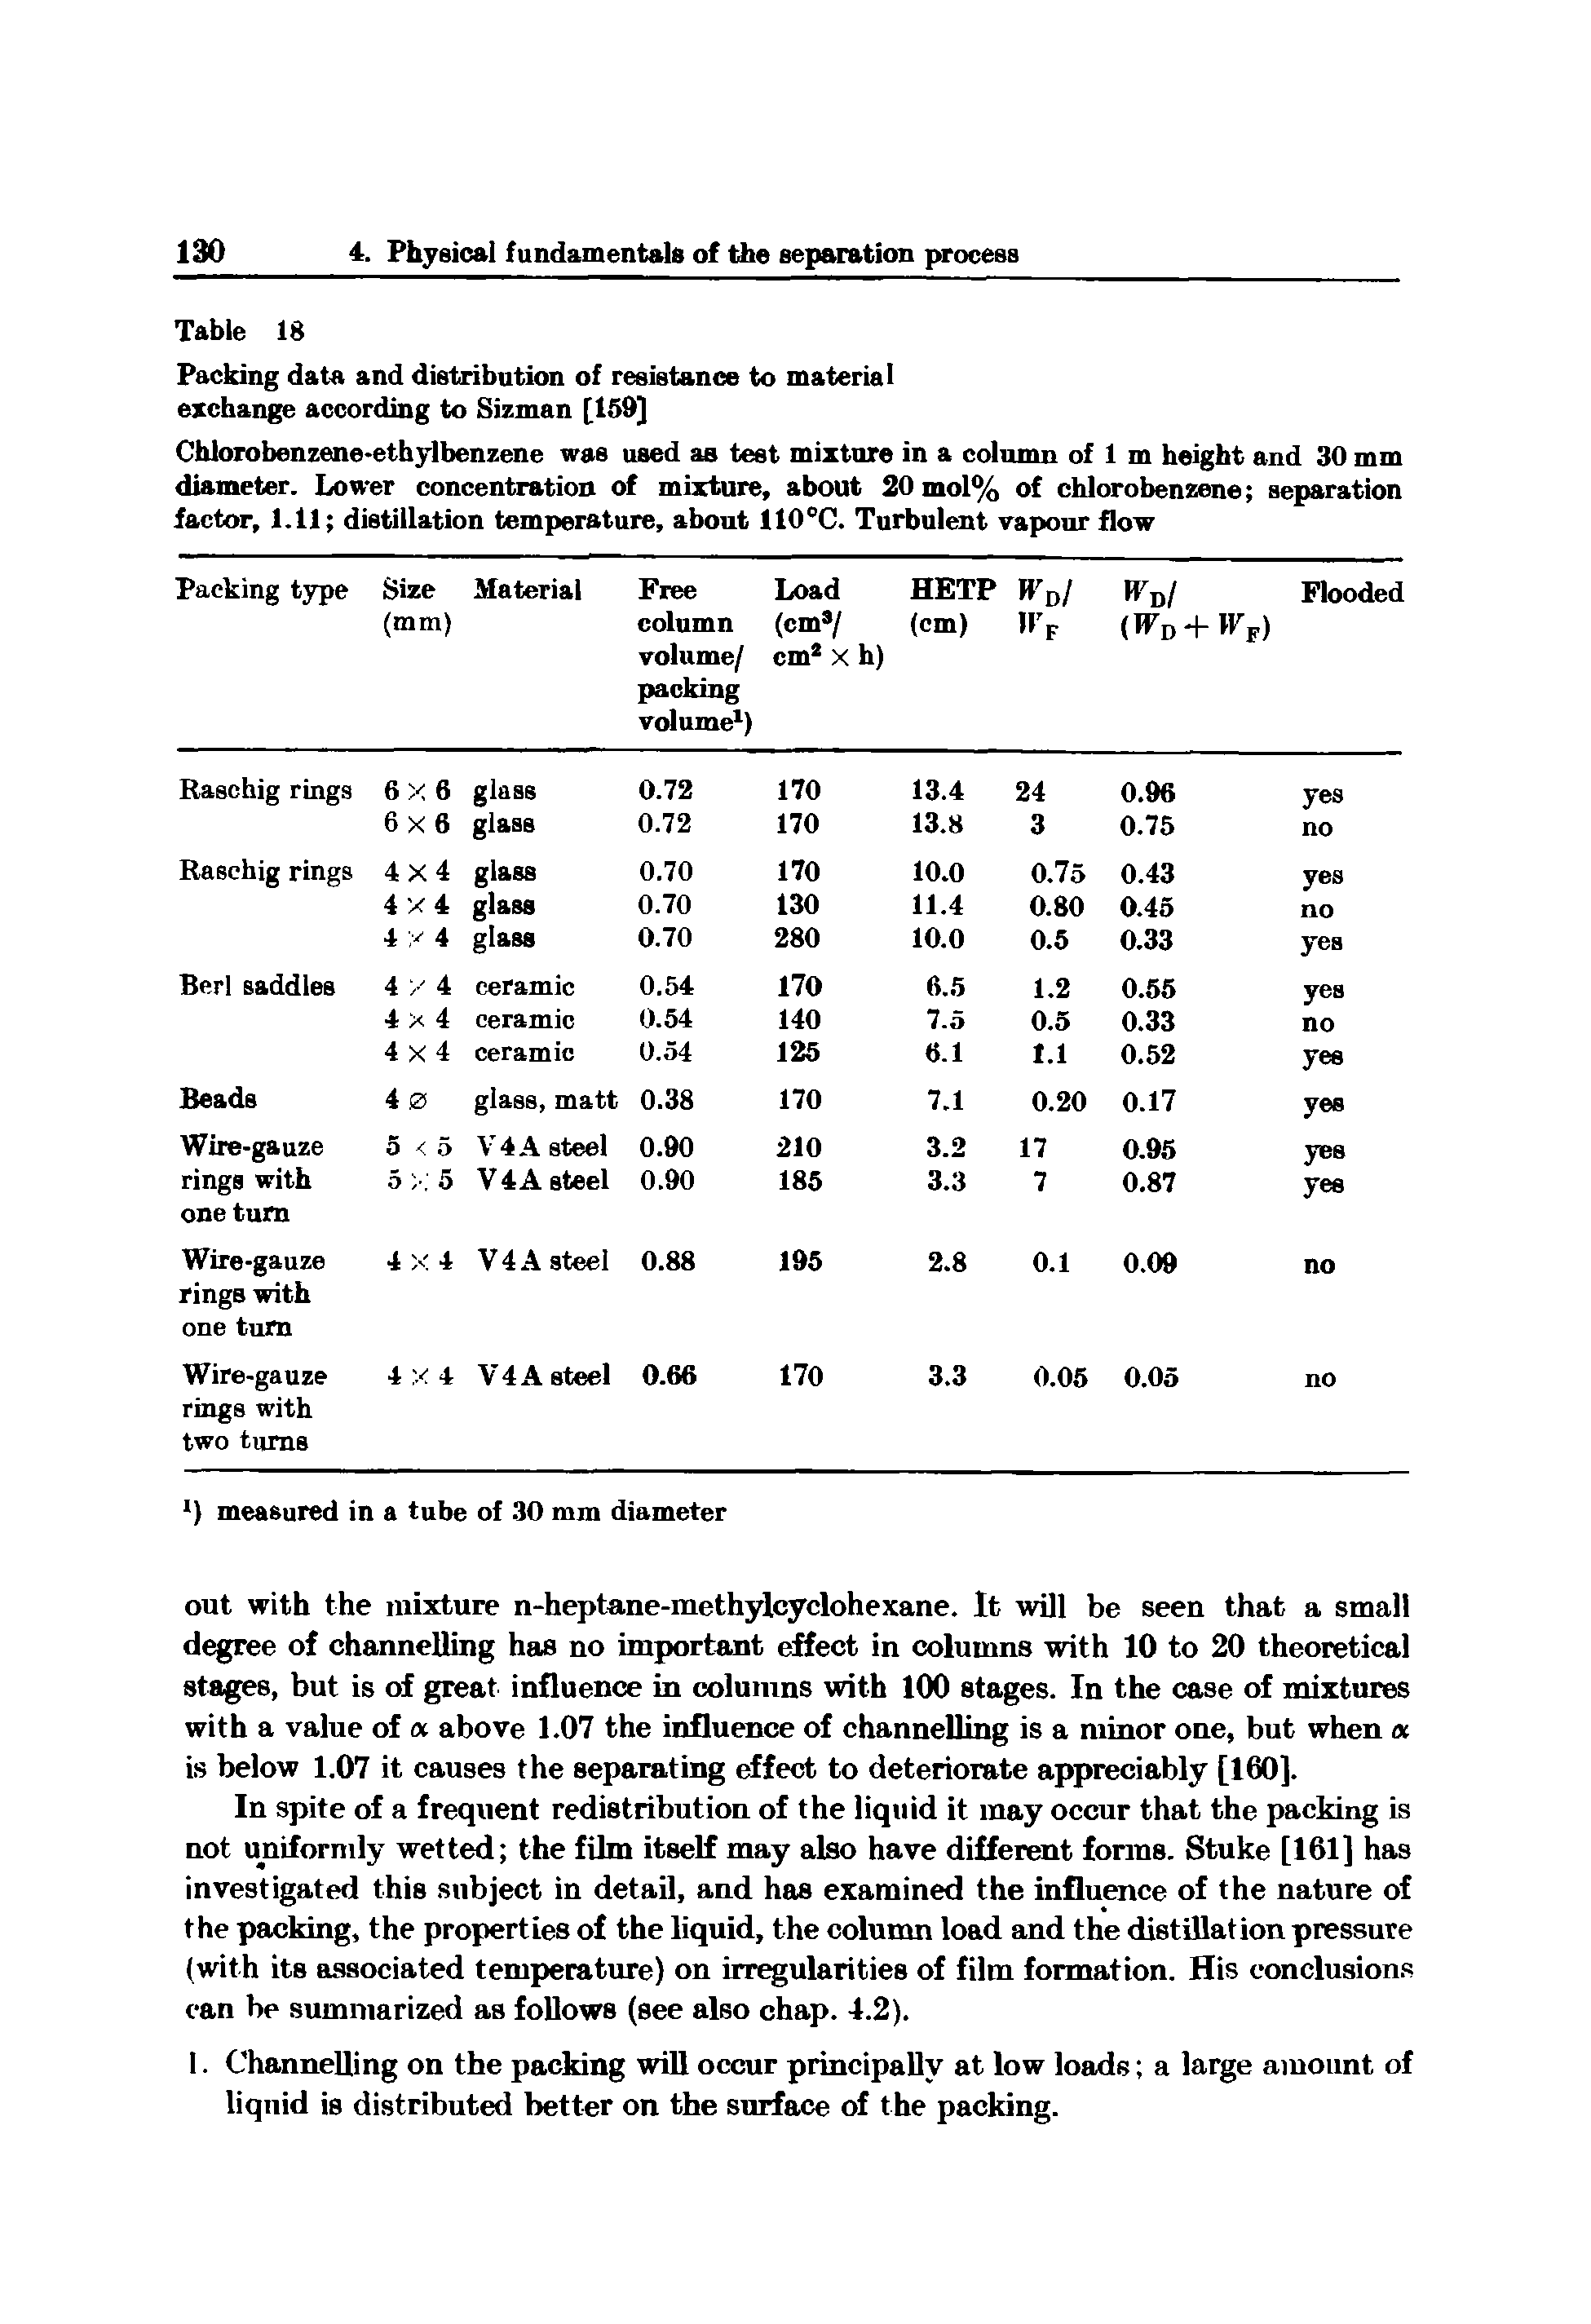 Table 18 Packing data and distribution of resistance to material exehange according to Sizman [159] Chlorobenzene-ethylbenzene was used as test mixture in a column of 1 m height and 30 mm diameter. Lower concentration of mixture, about 20 mol% of chlorobenzene separation factor, 1.11 distillation temperature, about 110°C. Turbulent vapour flow ...